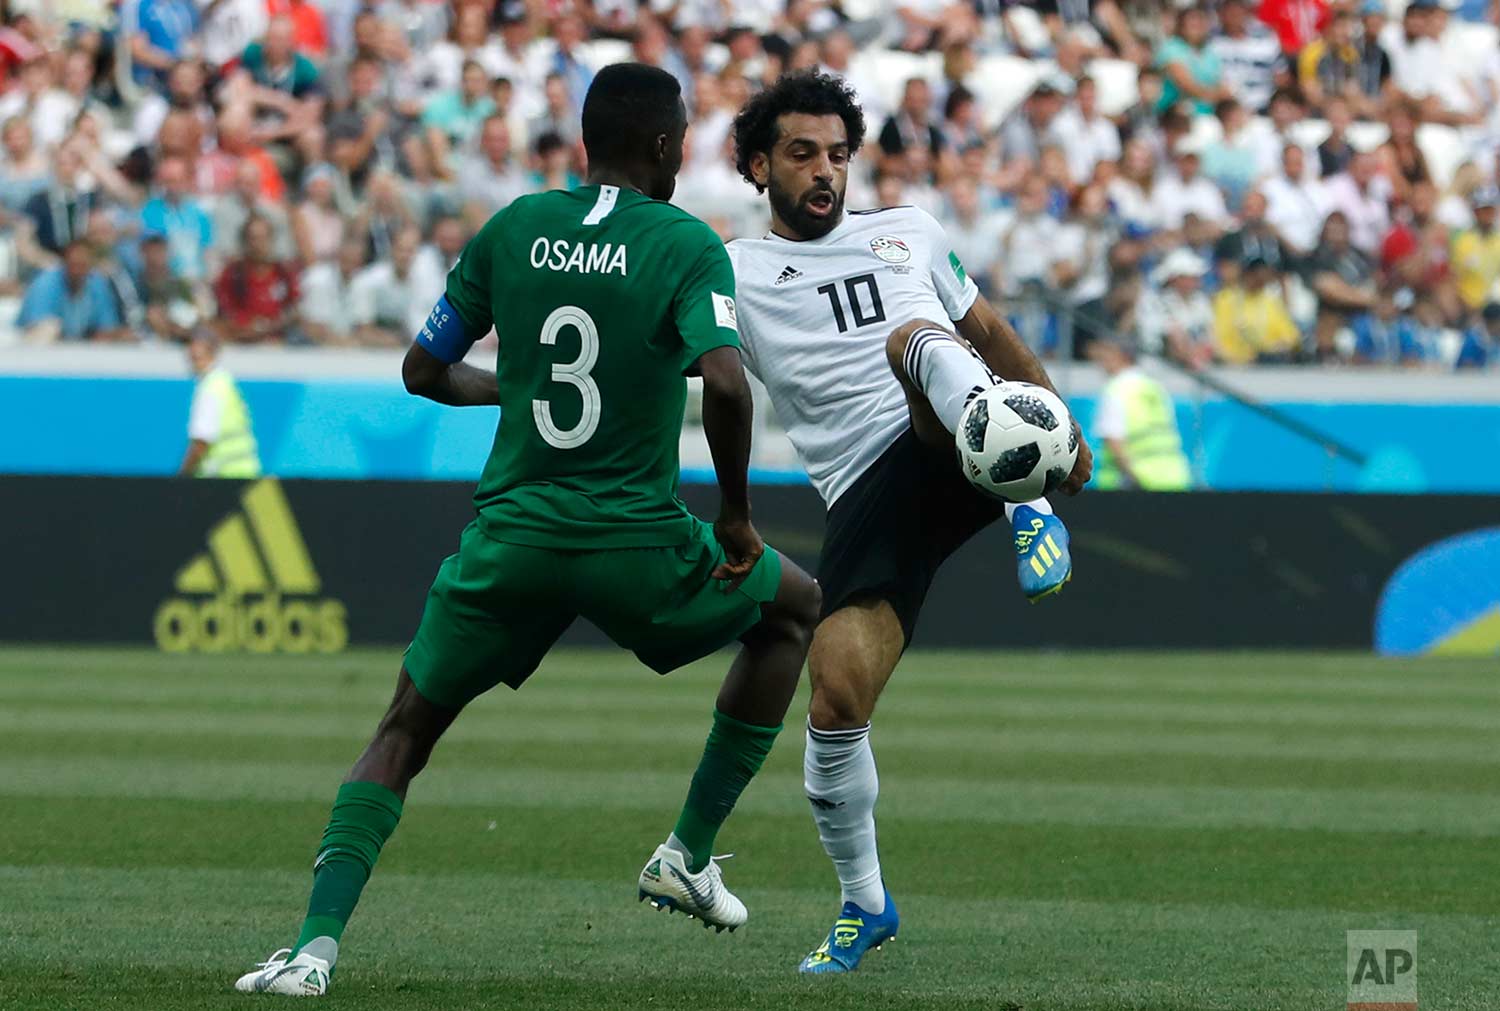  Saudi Arabia's Osama Hawsawi, left, and Egypt's Mohamed Salah challenge for the ball during the group A match between Saudi Arabia and Egypt at the 2018 soccer World Cup at the Volgograd Arena in Volgograd, Russia, Monday, June 25, 2018. (AP Photo/D